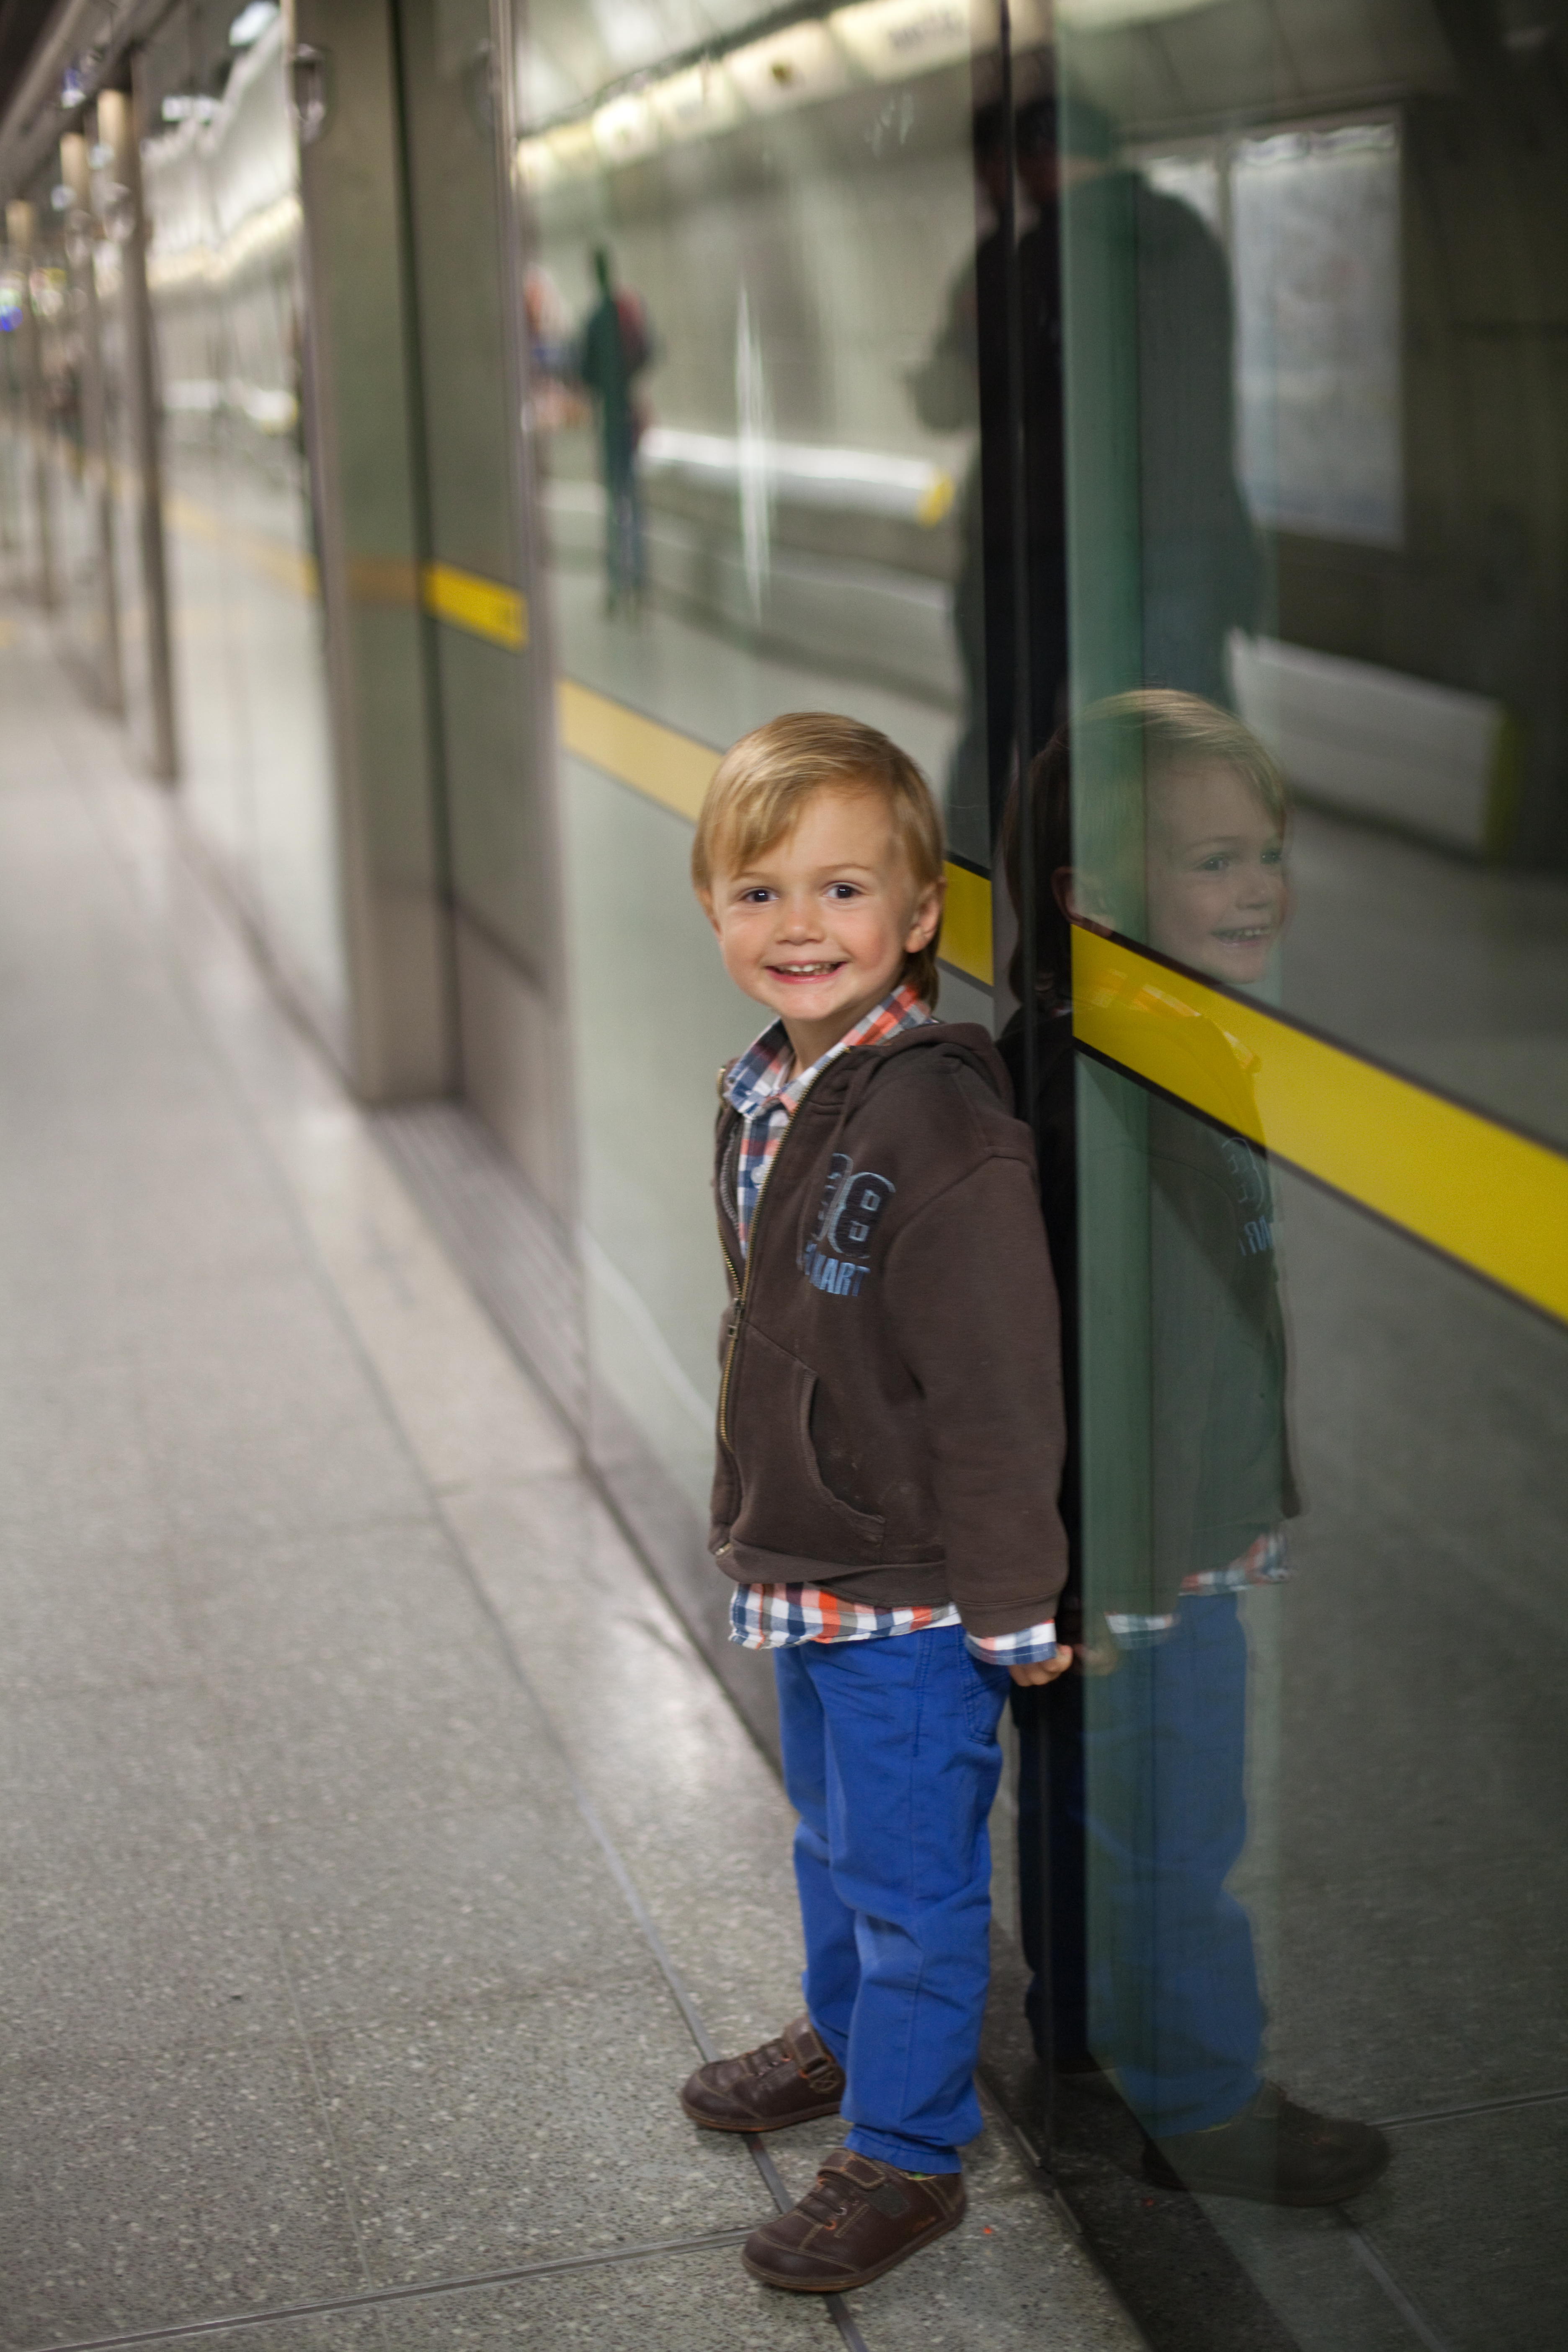 Smiling boy is waiting for train inside underground station in London. | Source: Getty Images